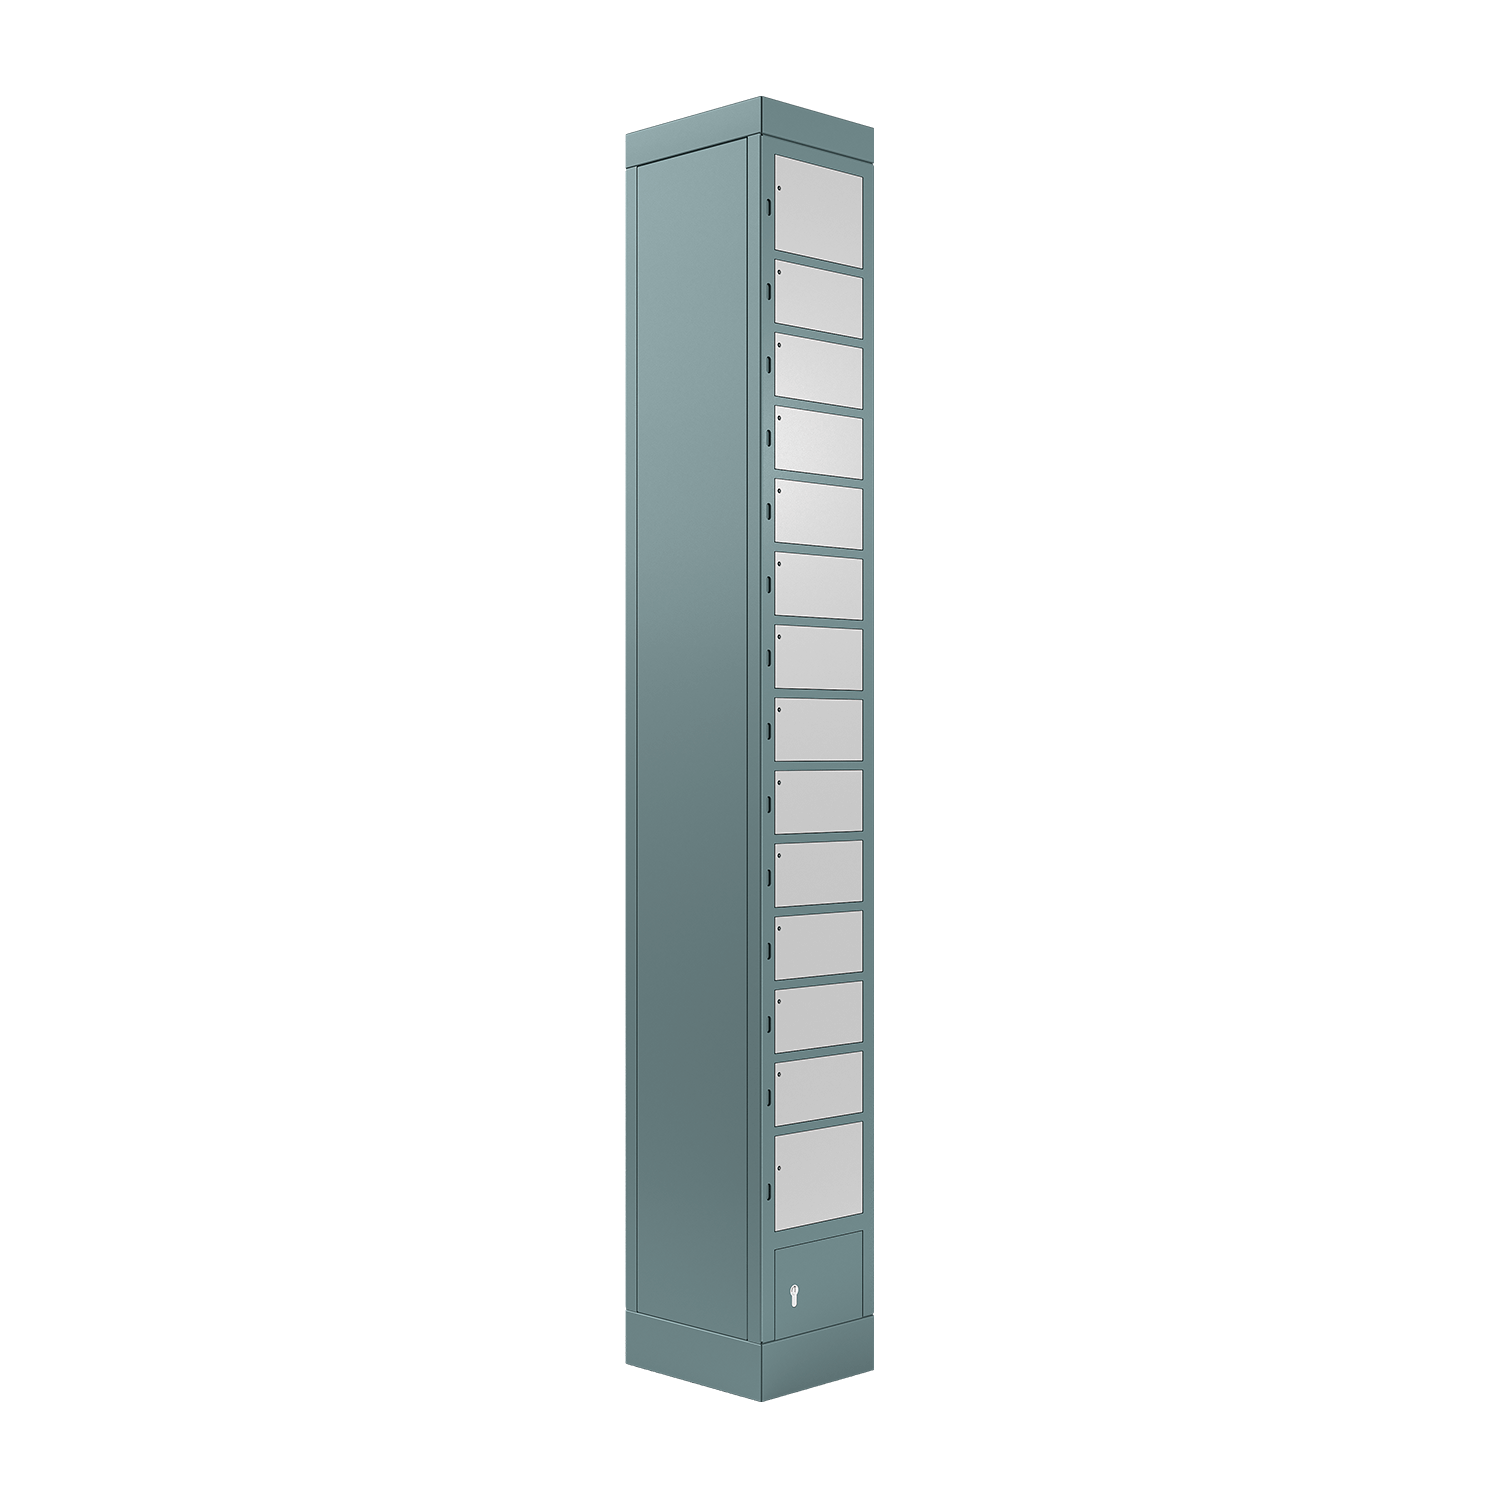 locker compartment system, size S, with 14 compartments, left view